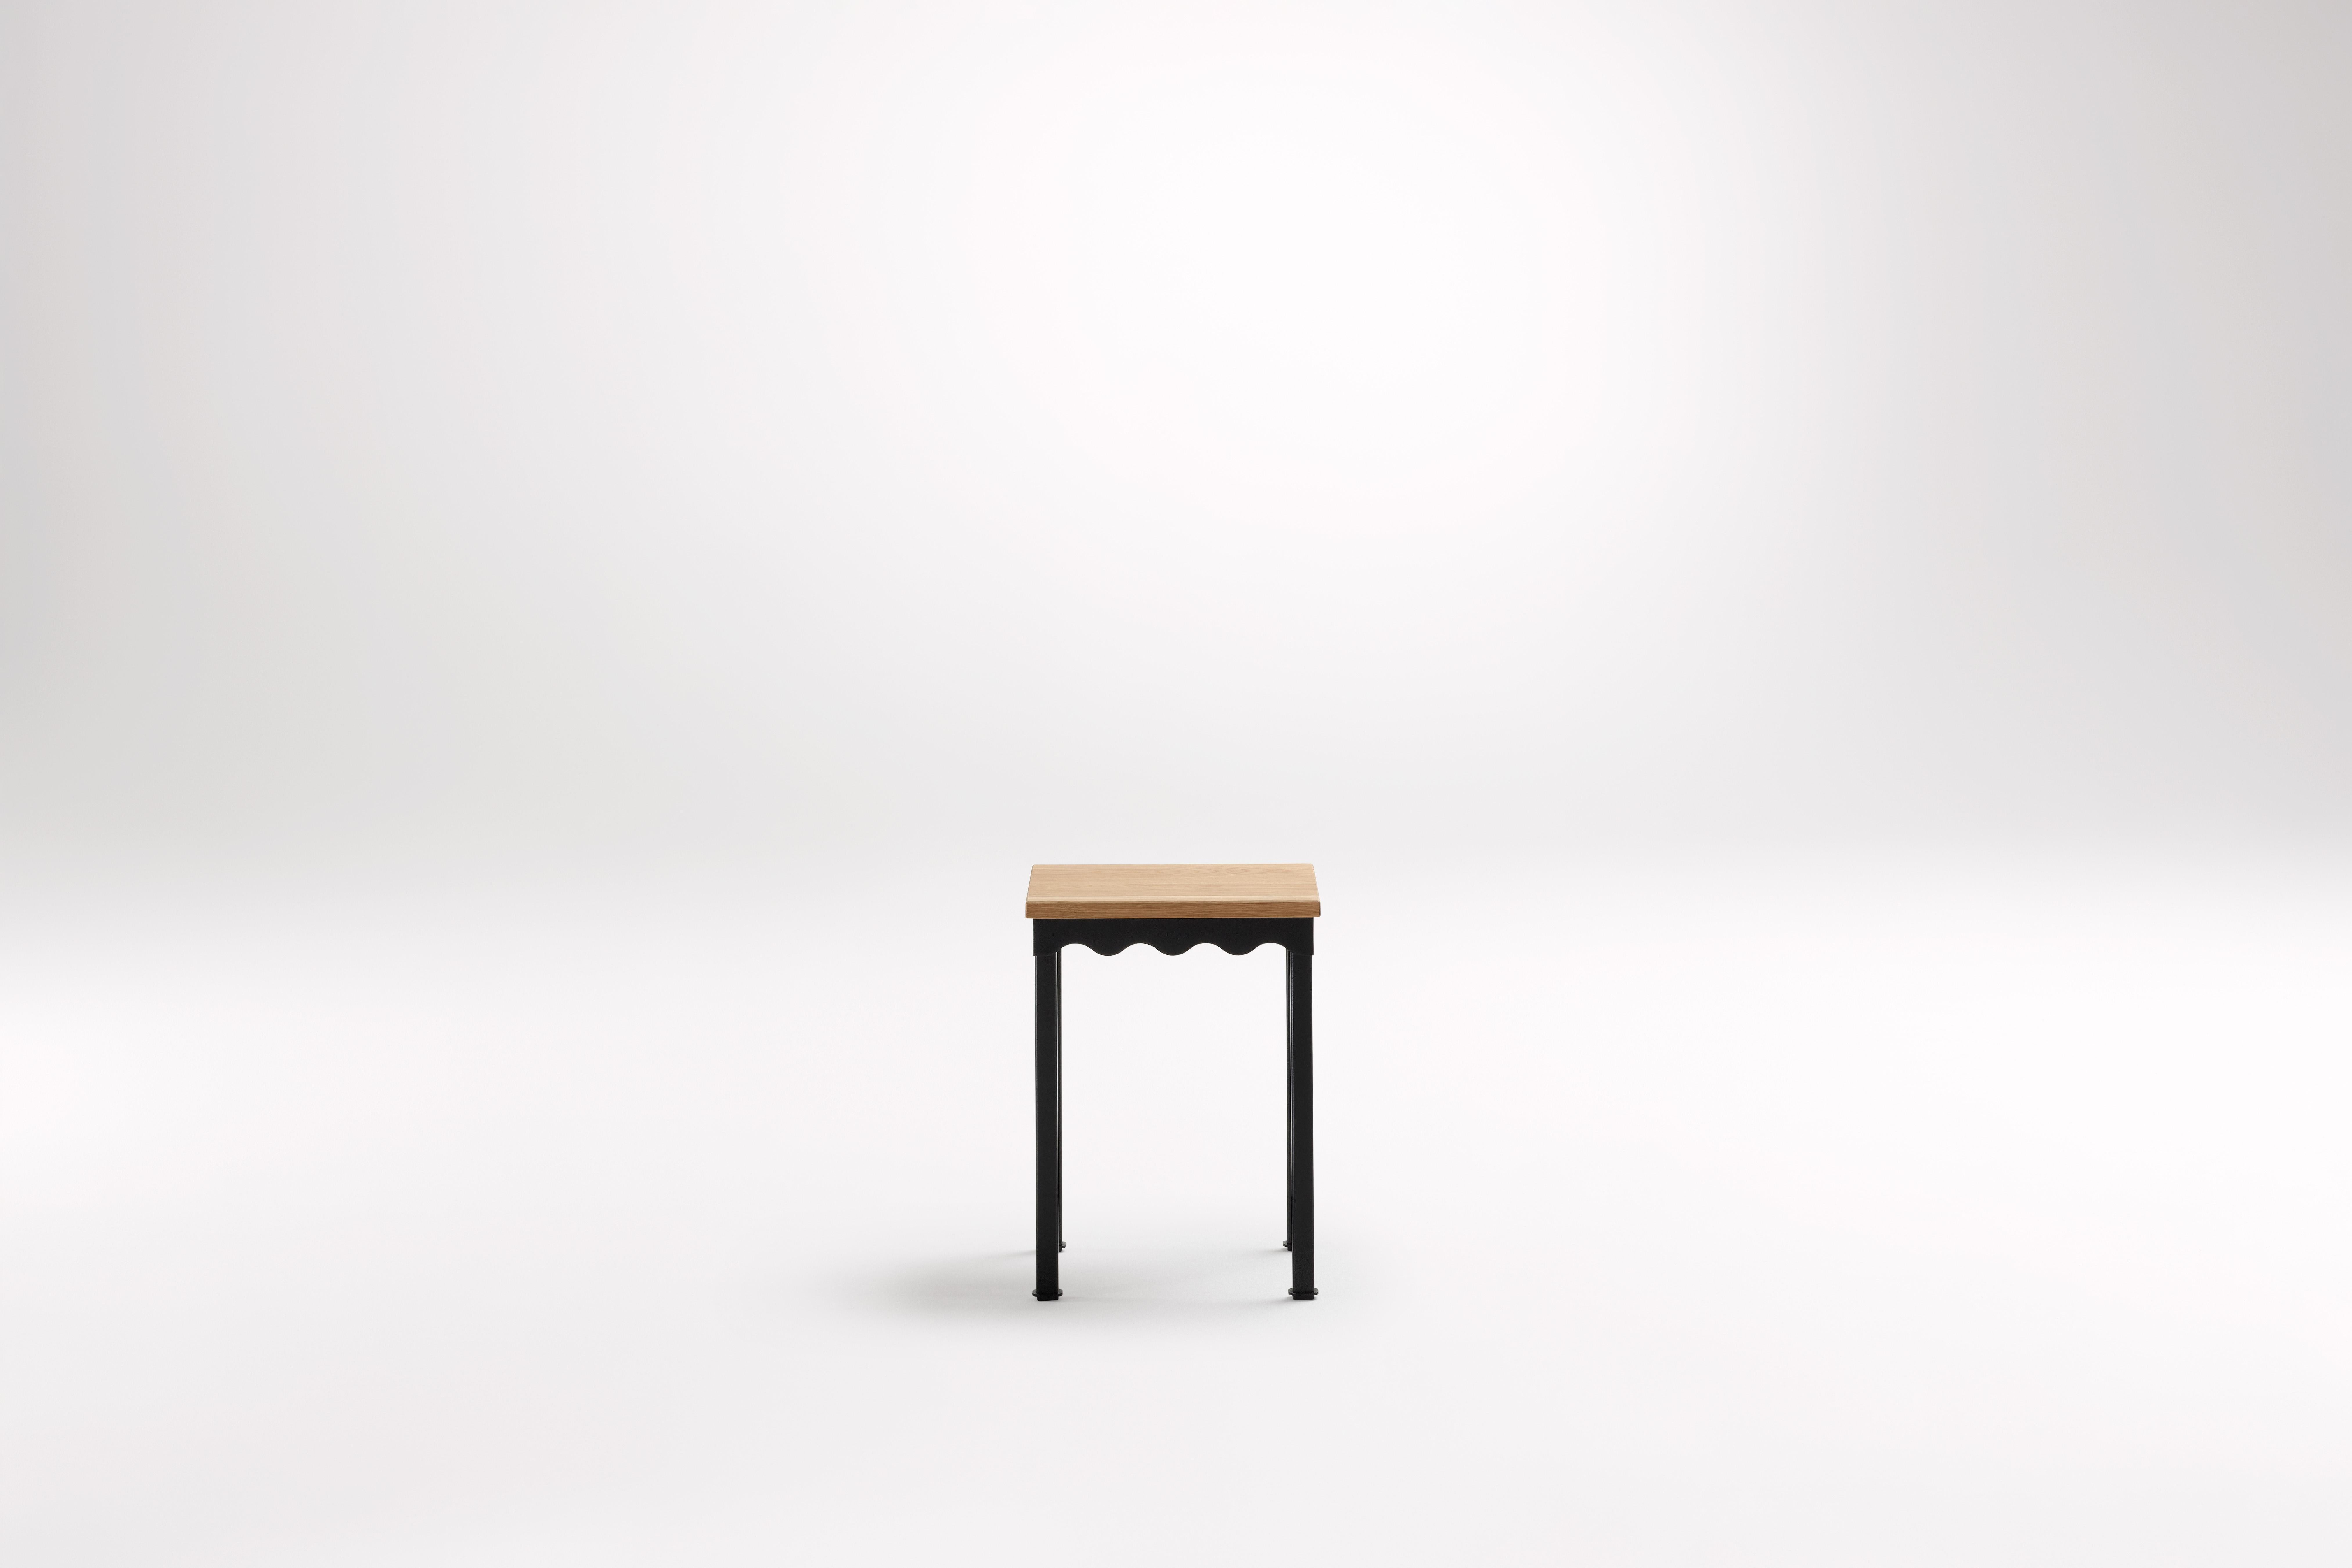 American Oak Bellini Low Stool by Coco Flip
Dimensions: D 34 x W 34 x H 45 cm
Materials: Timber / Stone tops, Powder-coated steel frame. 
Weight: 5 kg
Timber Tops :American Oak.
Frame Finishes: Textura Black.

Coco Flip is a Melbourne based